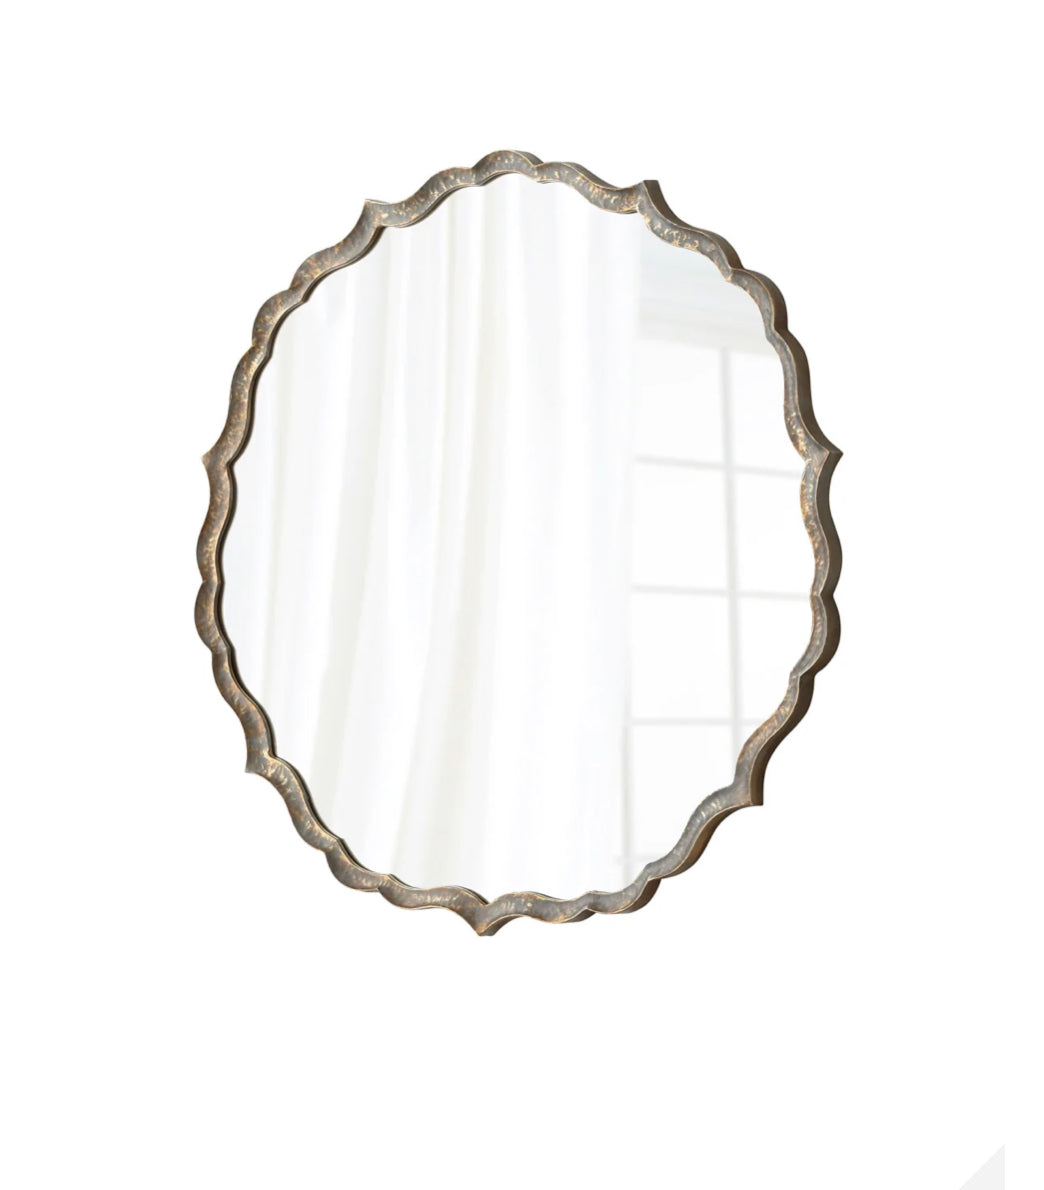 Add a modern twist to any bathroom or hallway with this interesting silver mirror. Cut out shapes add a contemporary spin to the classic frame.  Dimensions: Dia 44.25 x Ext 1.5  Weight: 38.55 lbs.  Qty Available: 24  Finish: Rustic Patina Materials: Iron and Mirrored Glass